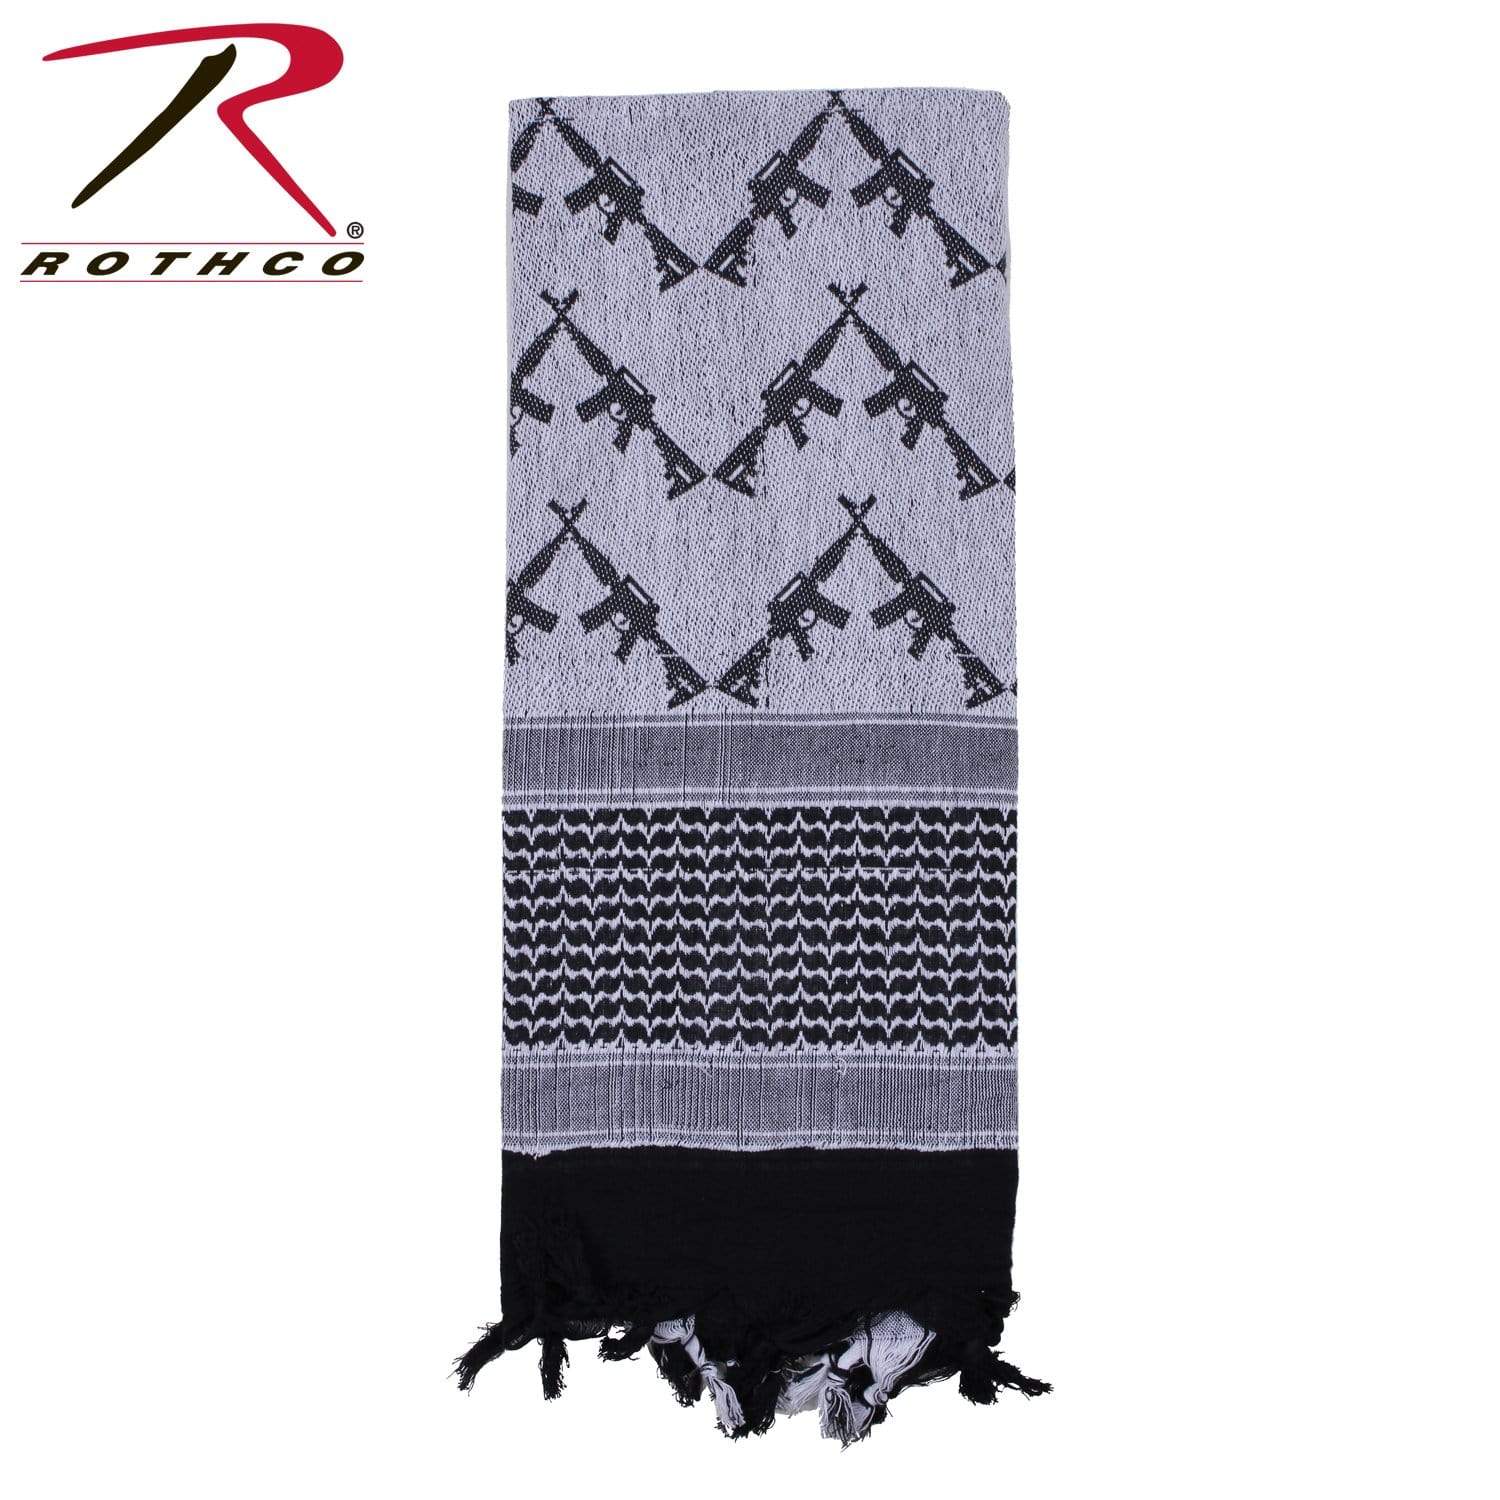 Rothco Crossed Rifles Shemagh Tactical Desert Keffiyeh Scarf - White - Eminent Paintball And Airsoft